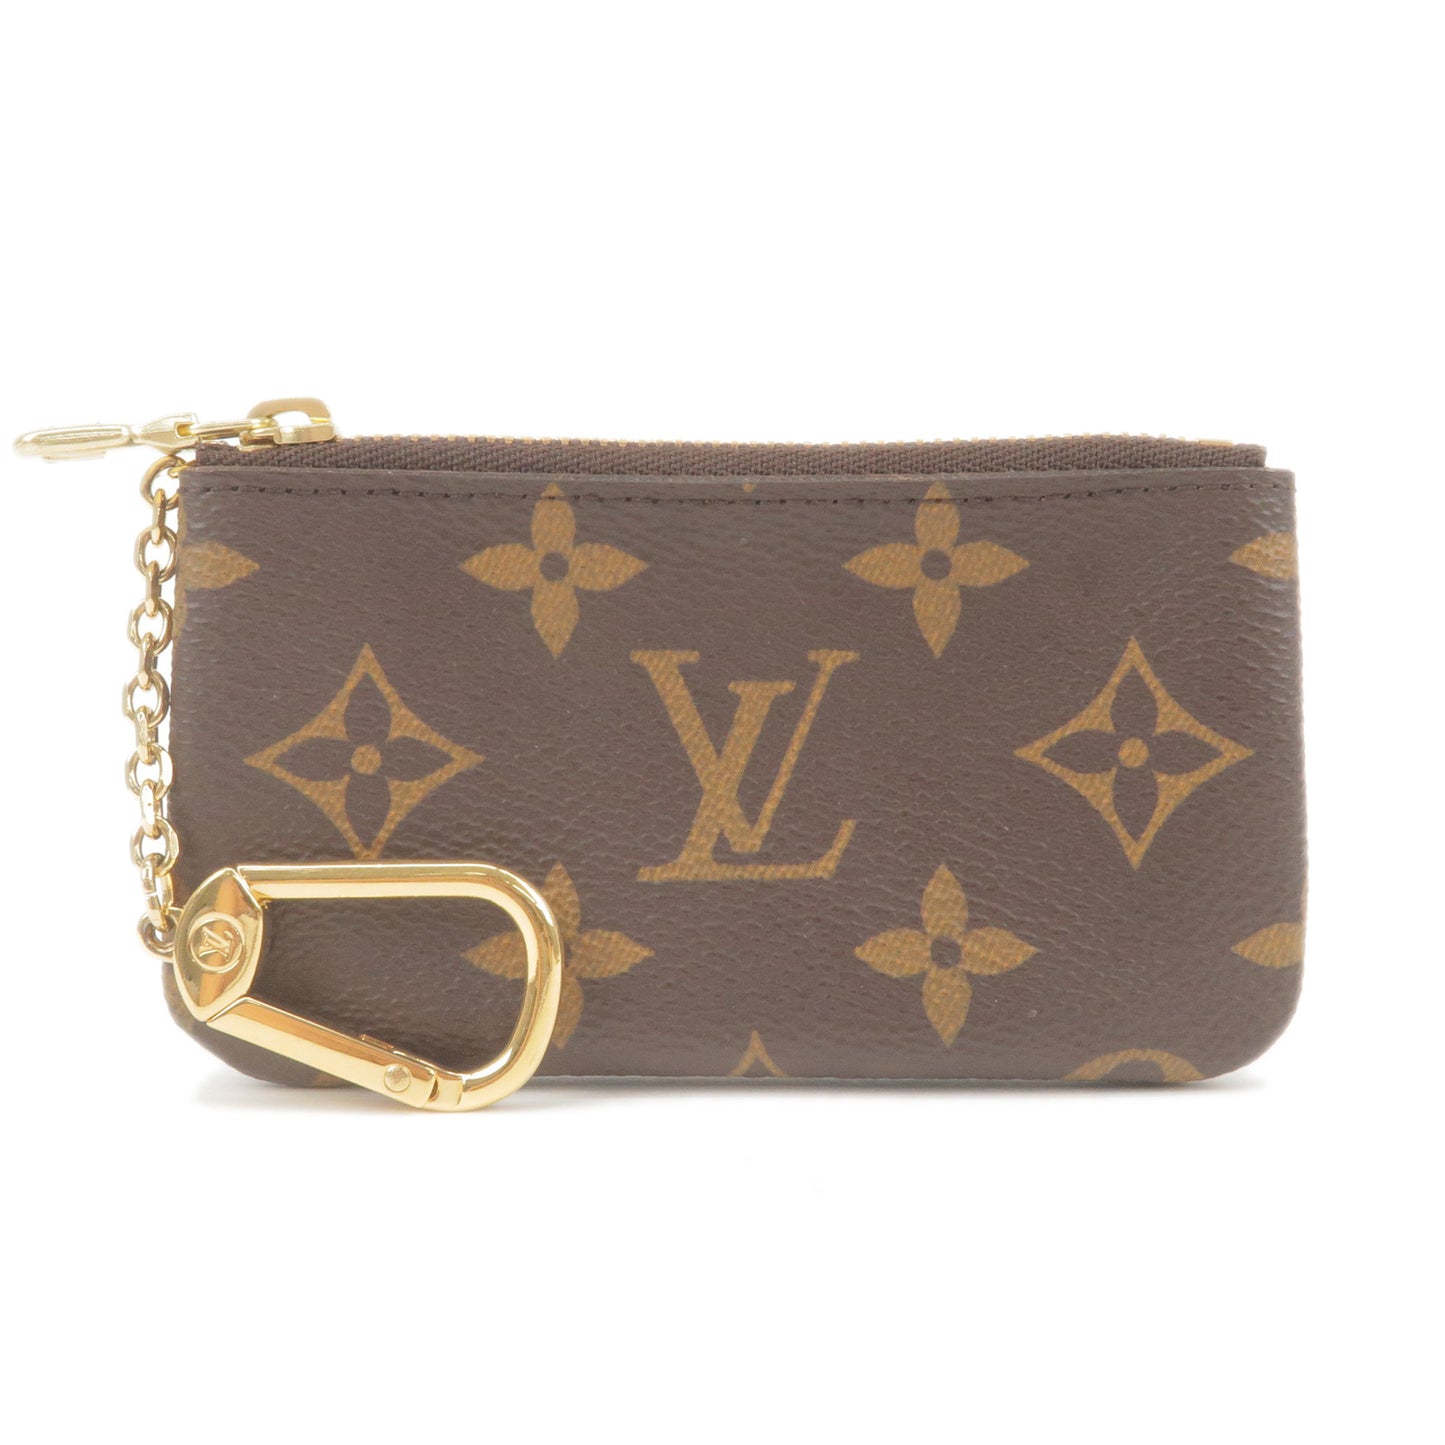 LOUIS VUITTON 4 KEY HOLDER & KEY CLES / POUCH FULL REVIEW